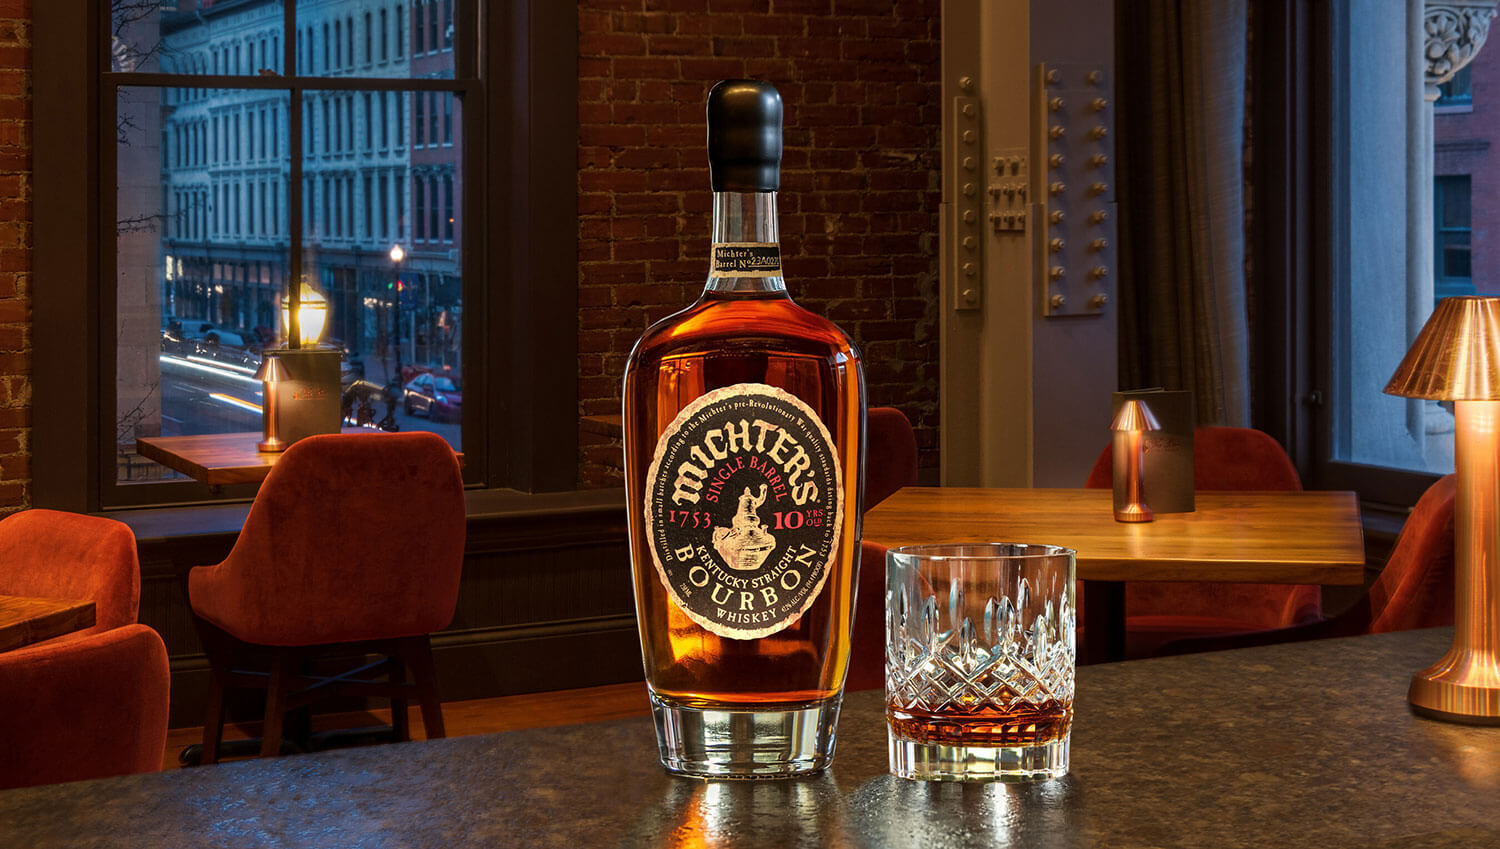 Michter's 10 Year Bourbon bottle and pour